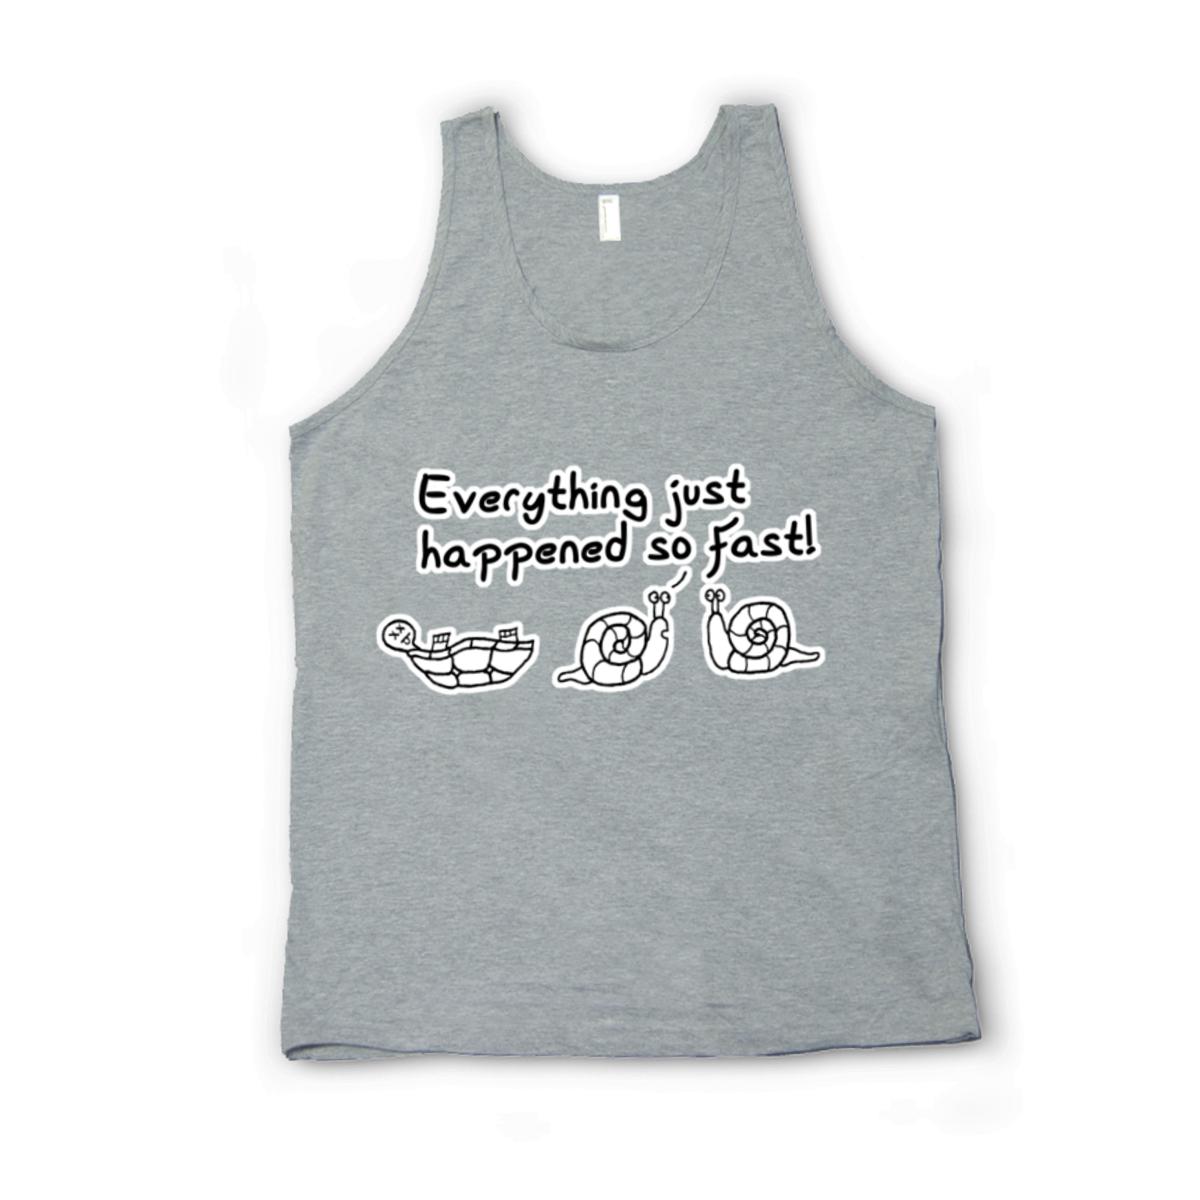 Happened So Fast Unisex Tank Top Small heather-grey